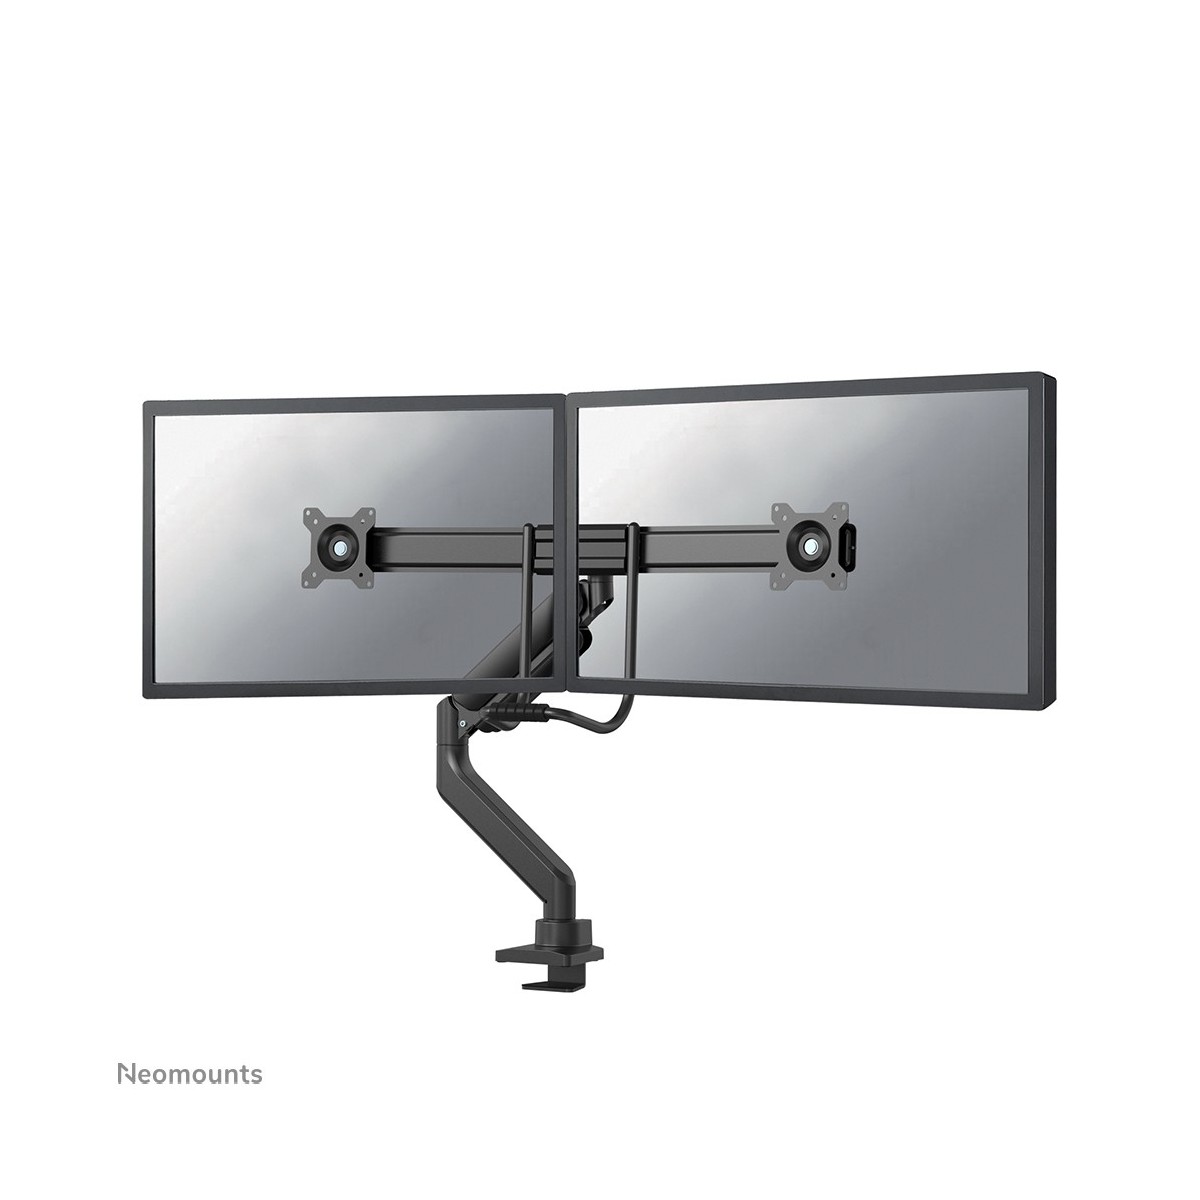 17-32 inch - Flat screen desk mount for 2 screens (clamp)